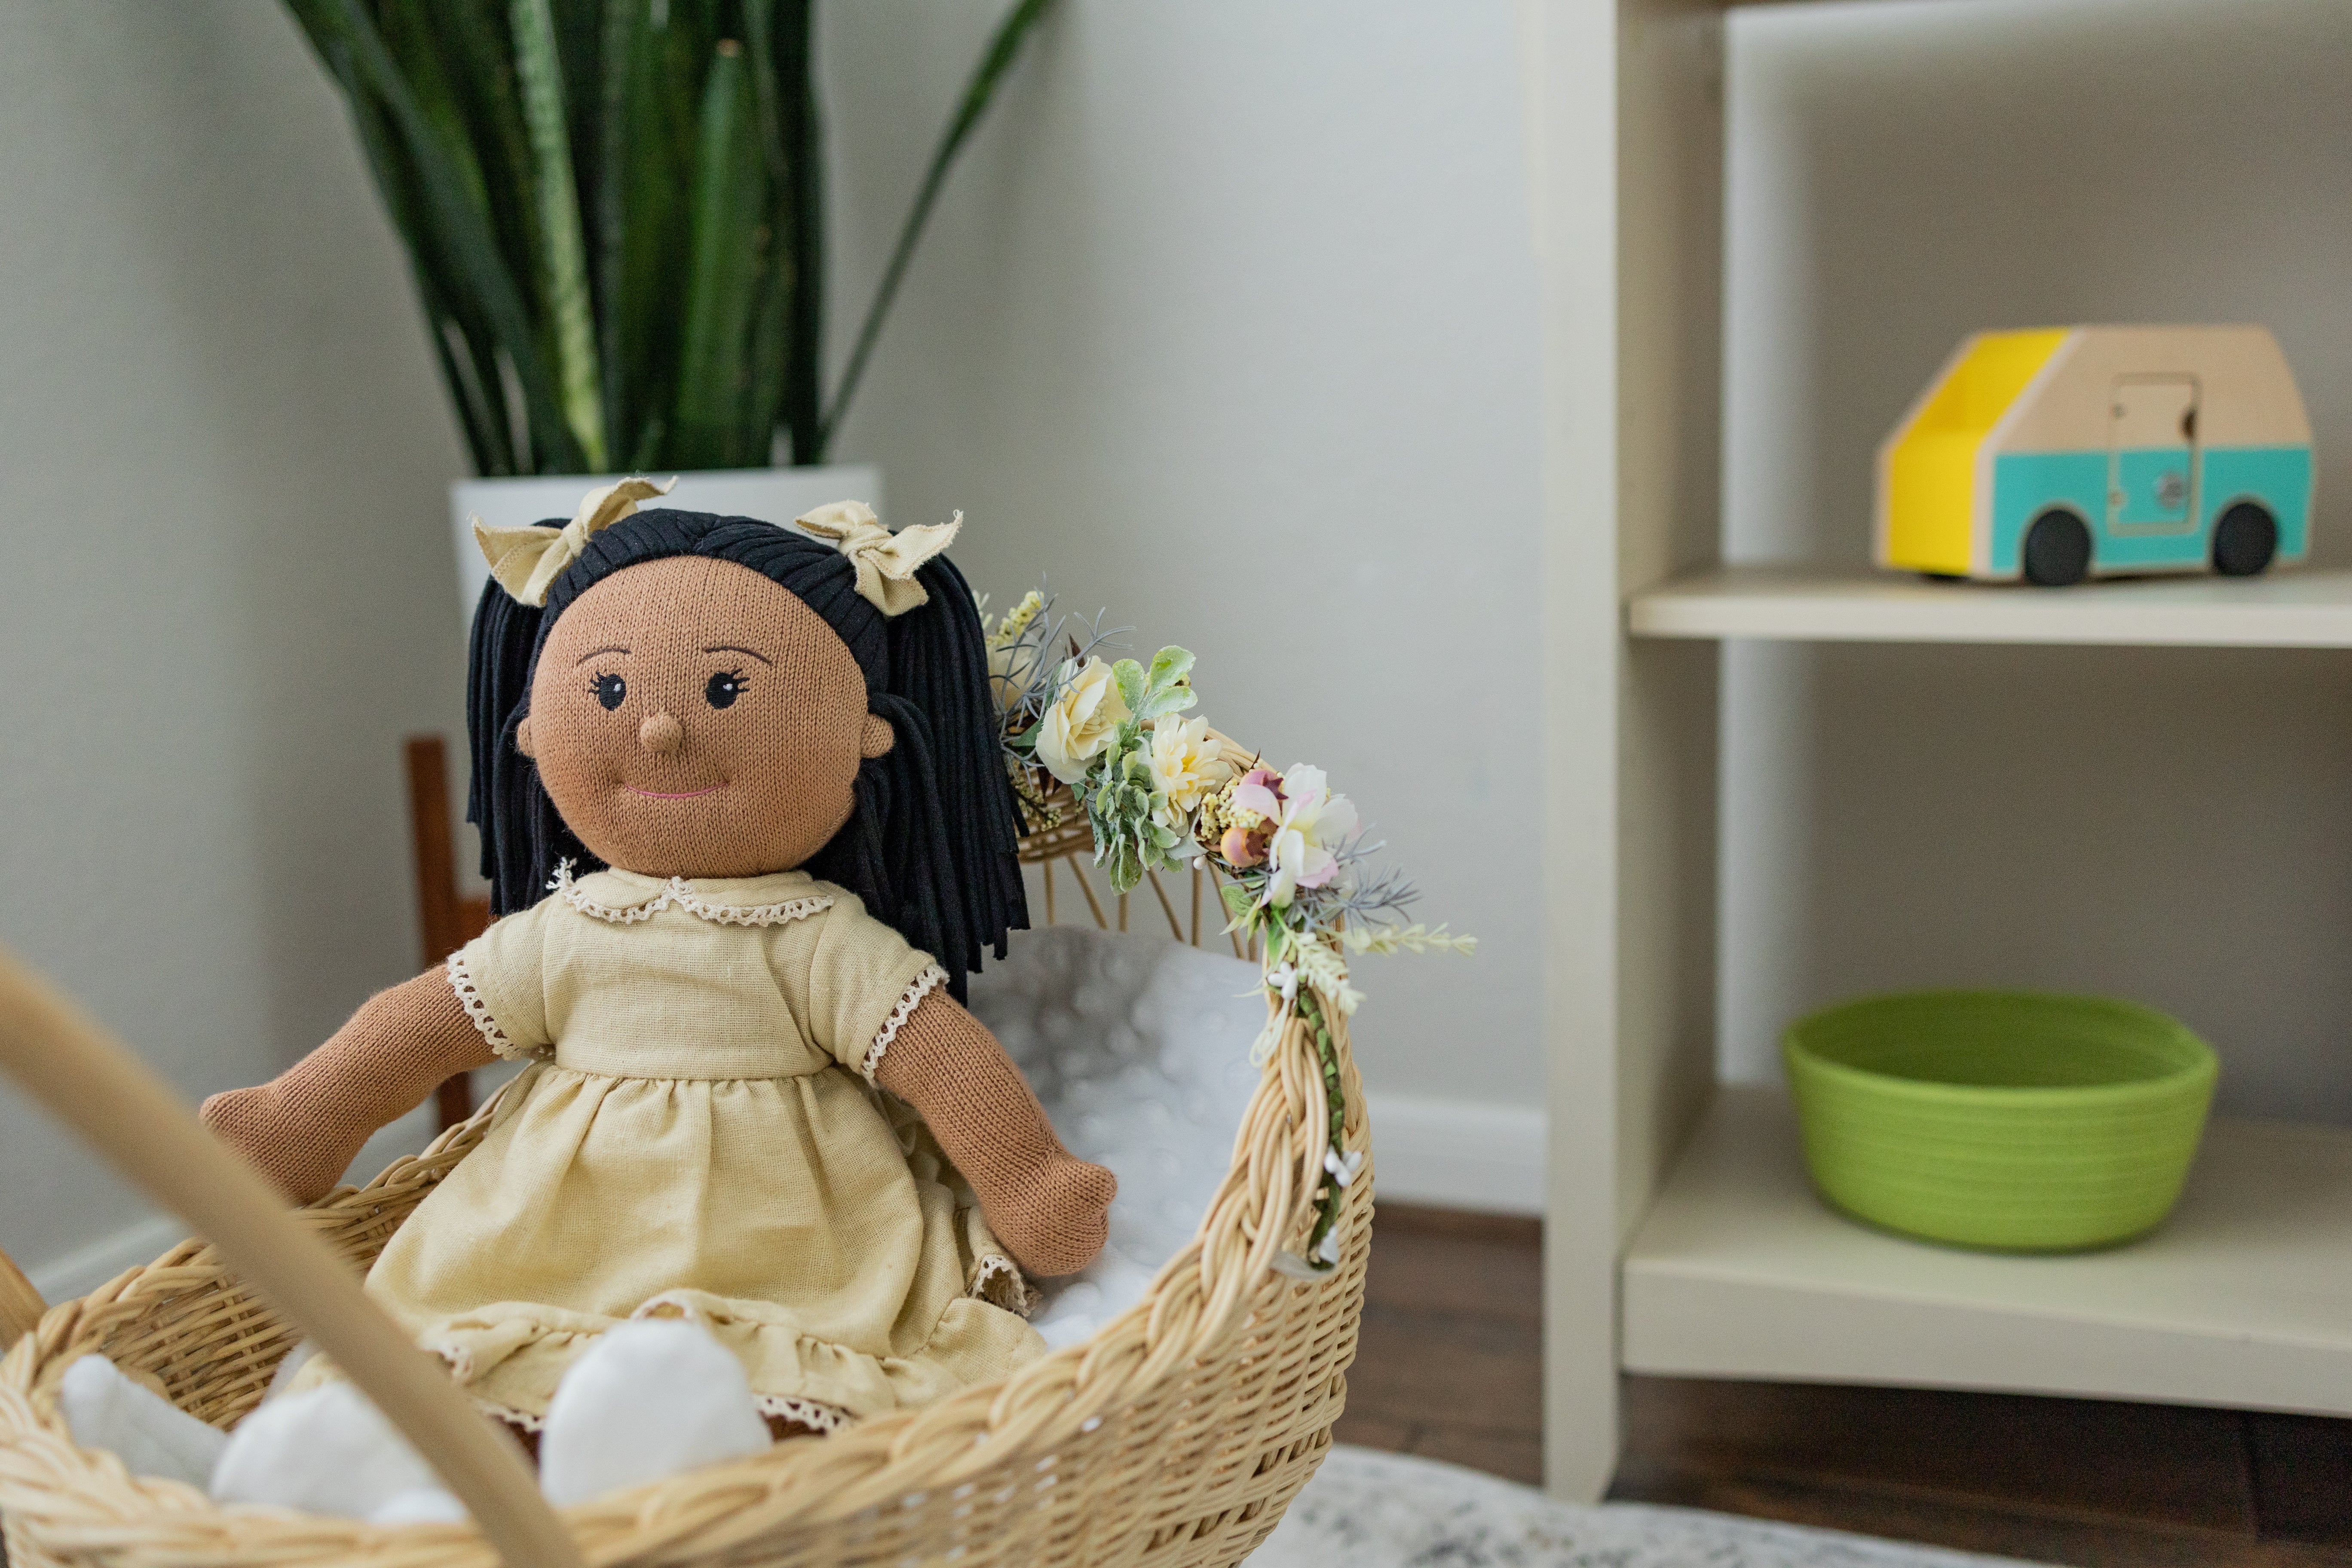 The Clementine Collective knitted doll Penelope